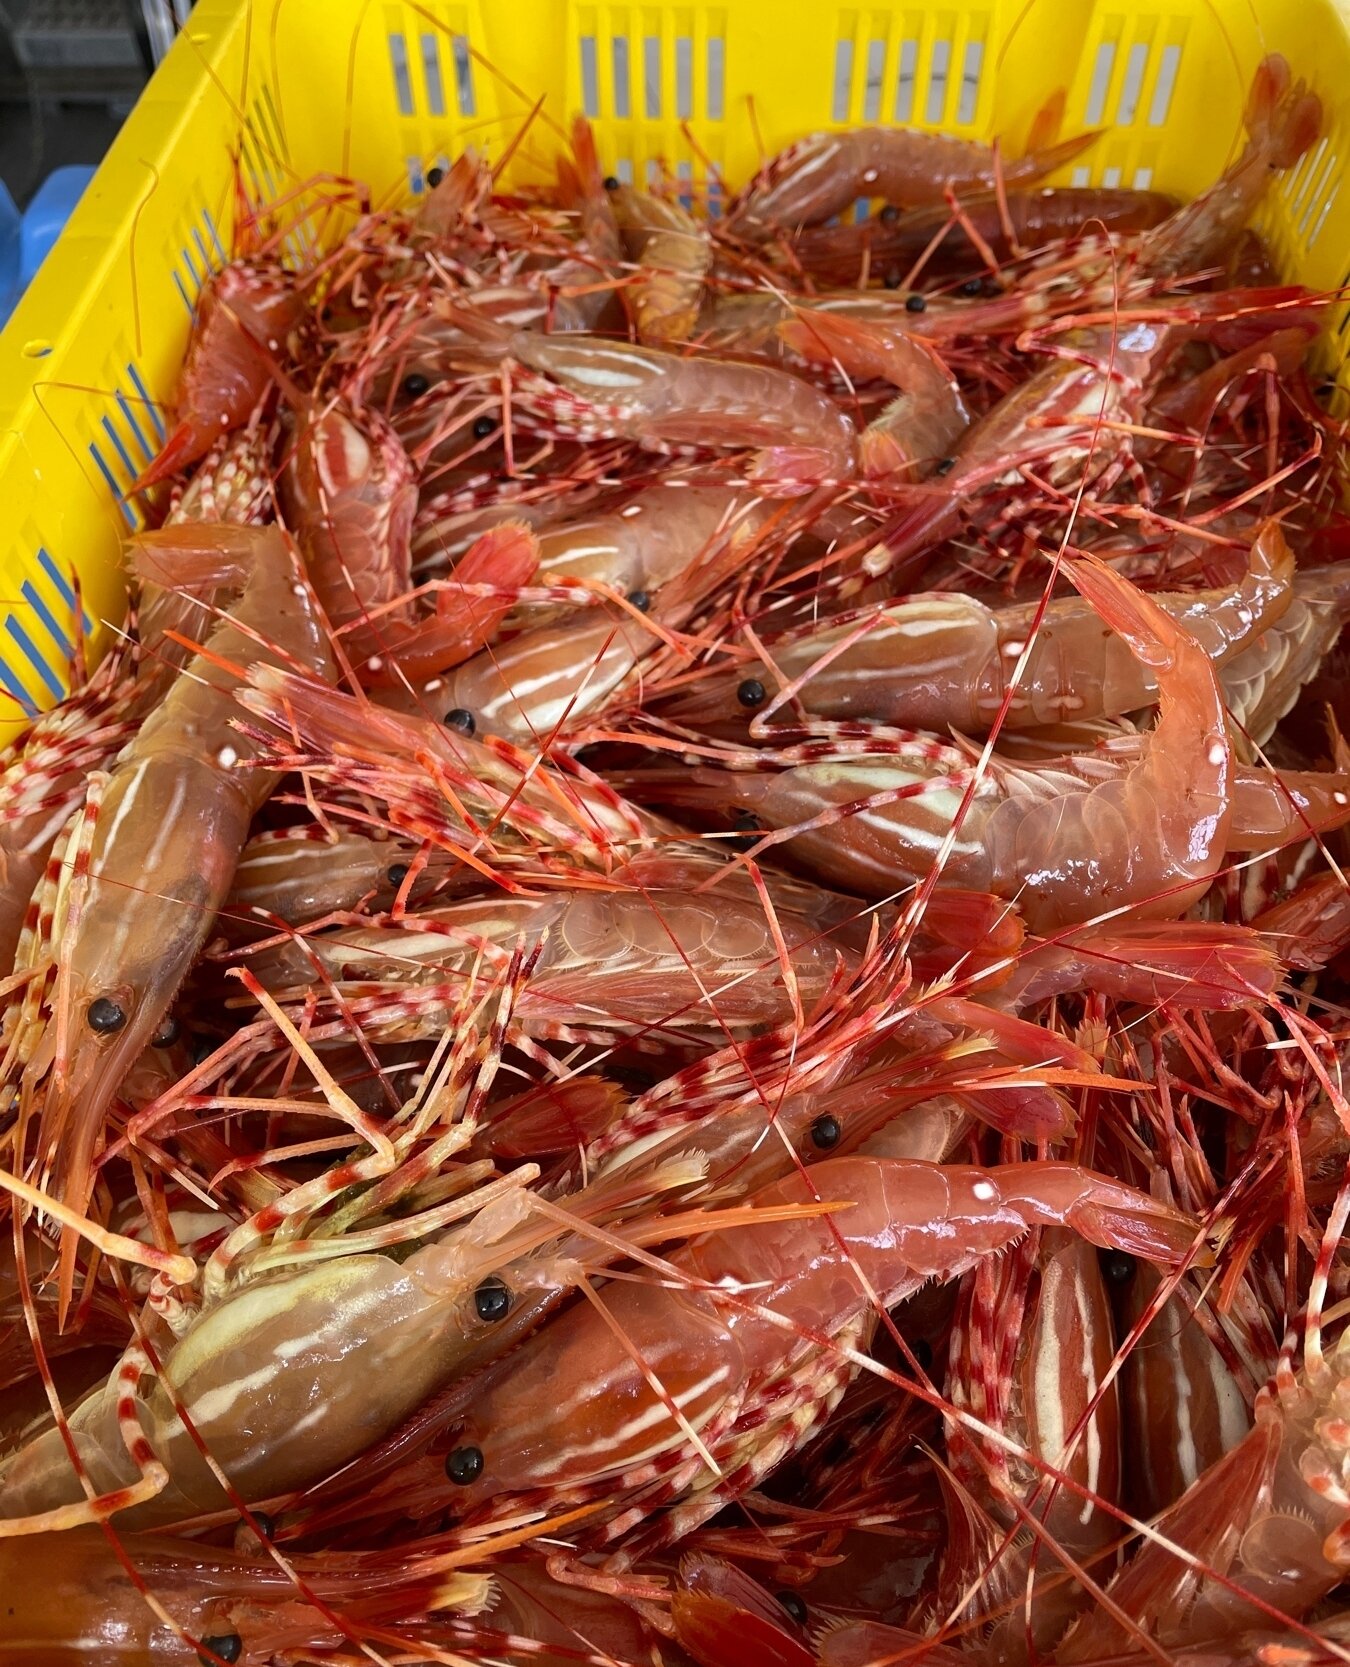 🦐 Saturday Pre-Orders SOLD OUT for May 20th 🦐  There are still pre-orders available for mid-week dates and the rest of May Long Weekend. Reserve now to avoid disappointment! 🍤 ⁠
⁠
#bcspotprawns #spotprawns #seafood #prawnslover #prawnlover #prawnd